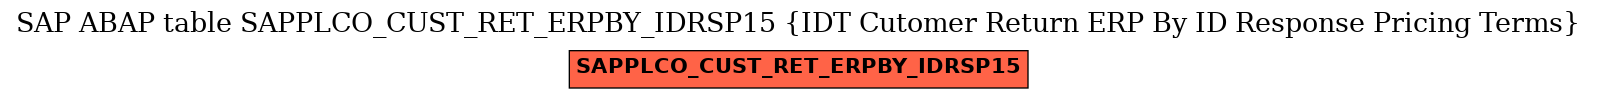 E-R Diagram for table SAPPLCO_CUST_RET_ERPBY_IDRSP15 (IDT Cutomer Return ERP By ID Response Pricing Terms)